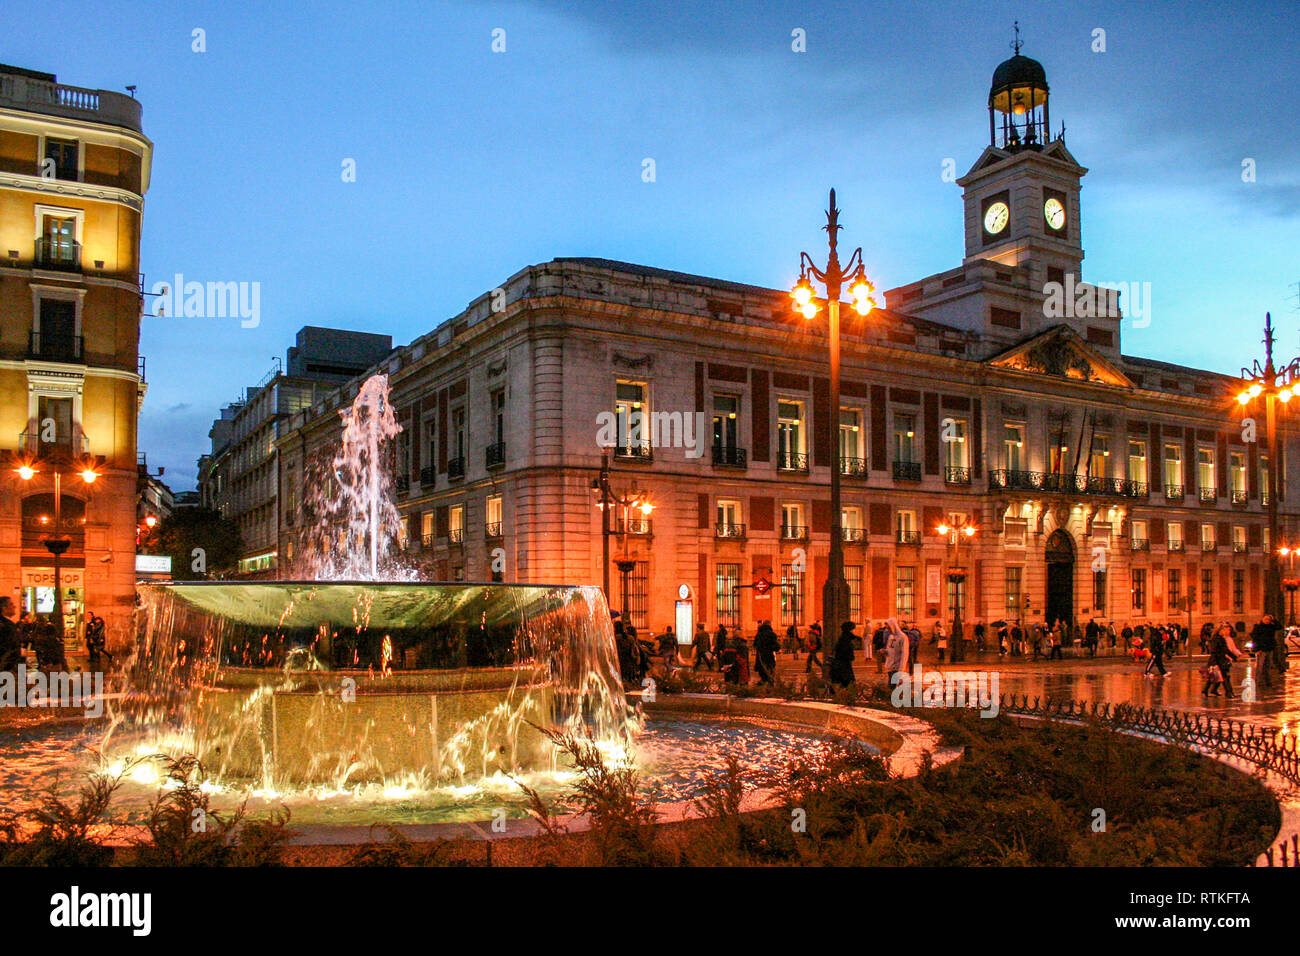 At Madrid - Spain - On february 2010 - Puerta del Sol at night Stock Photo